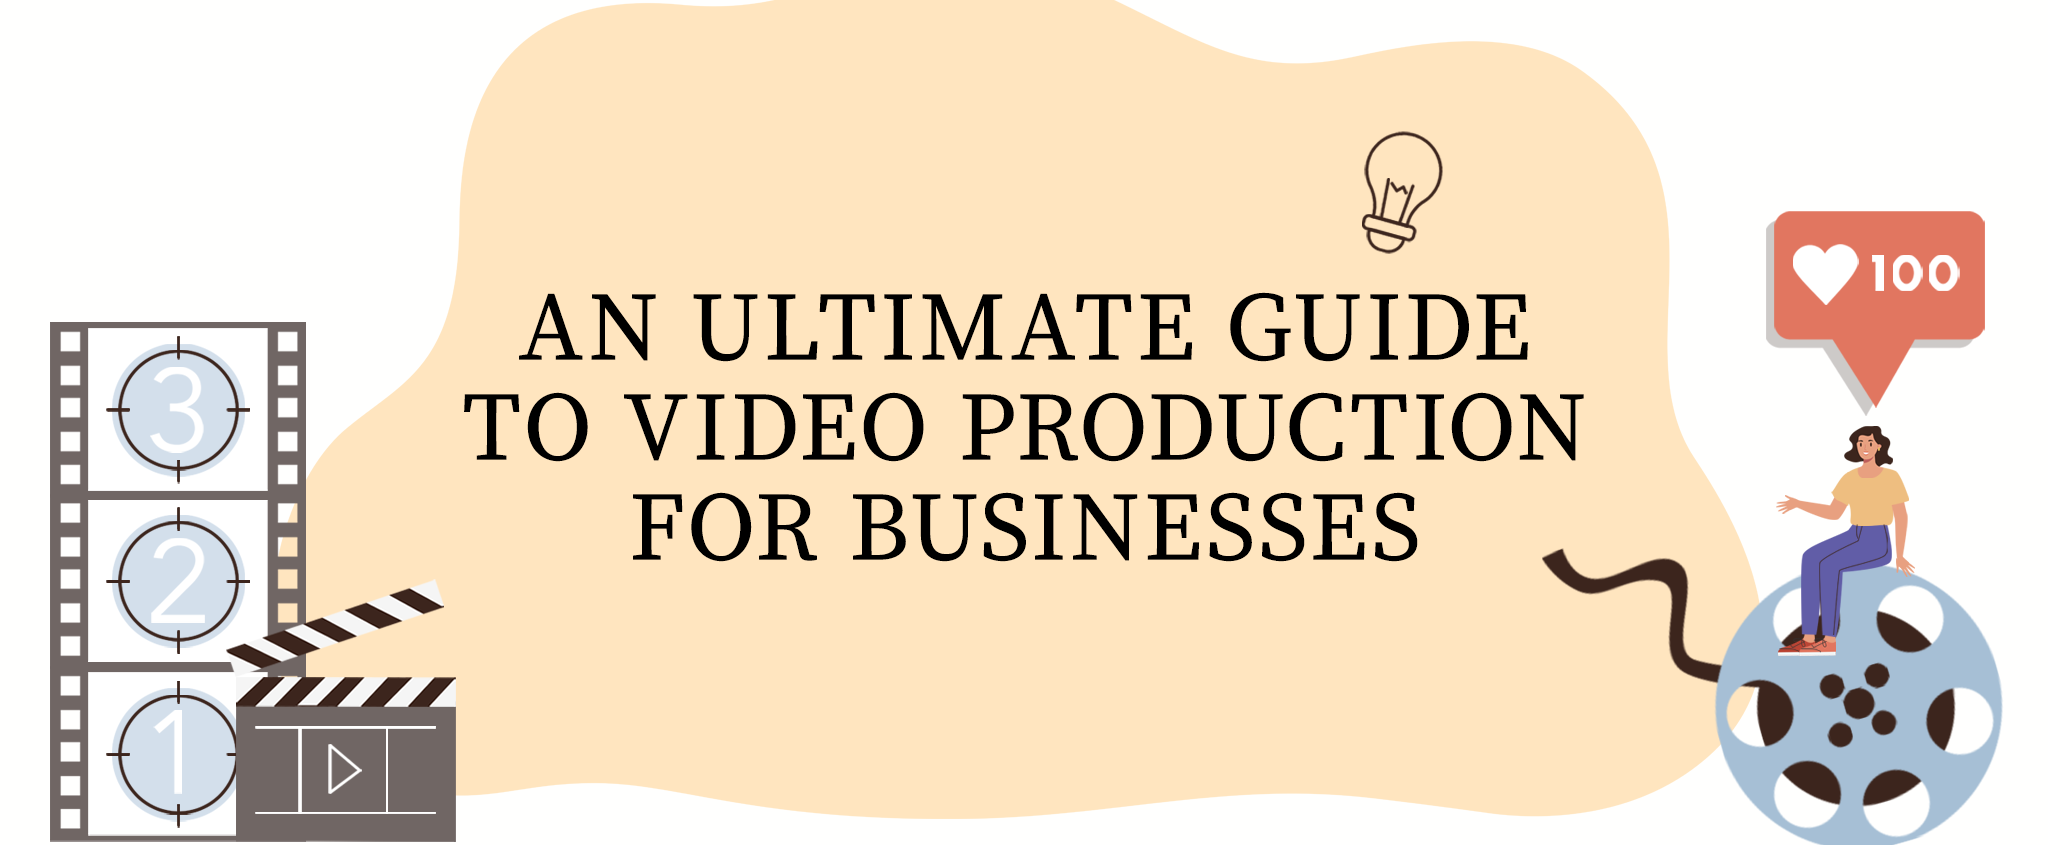 An Ultimate Guide to Video Production for Businesses